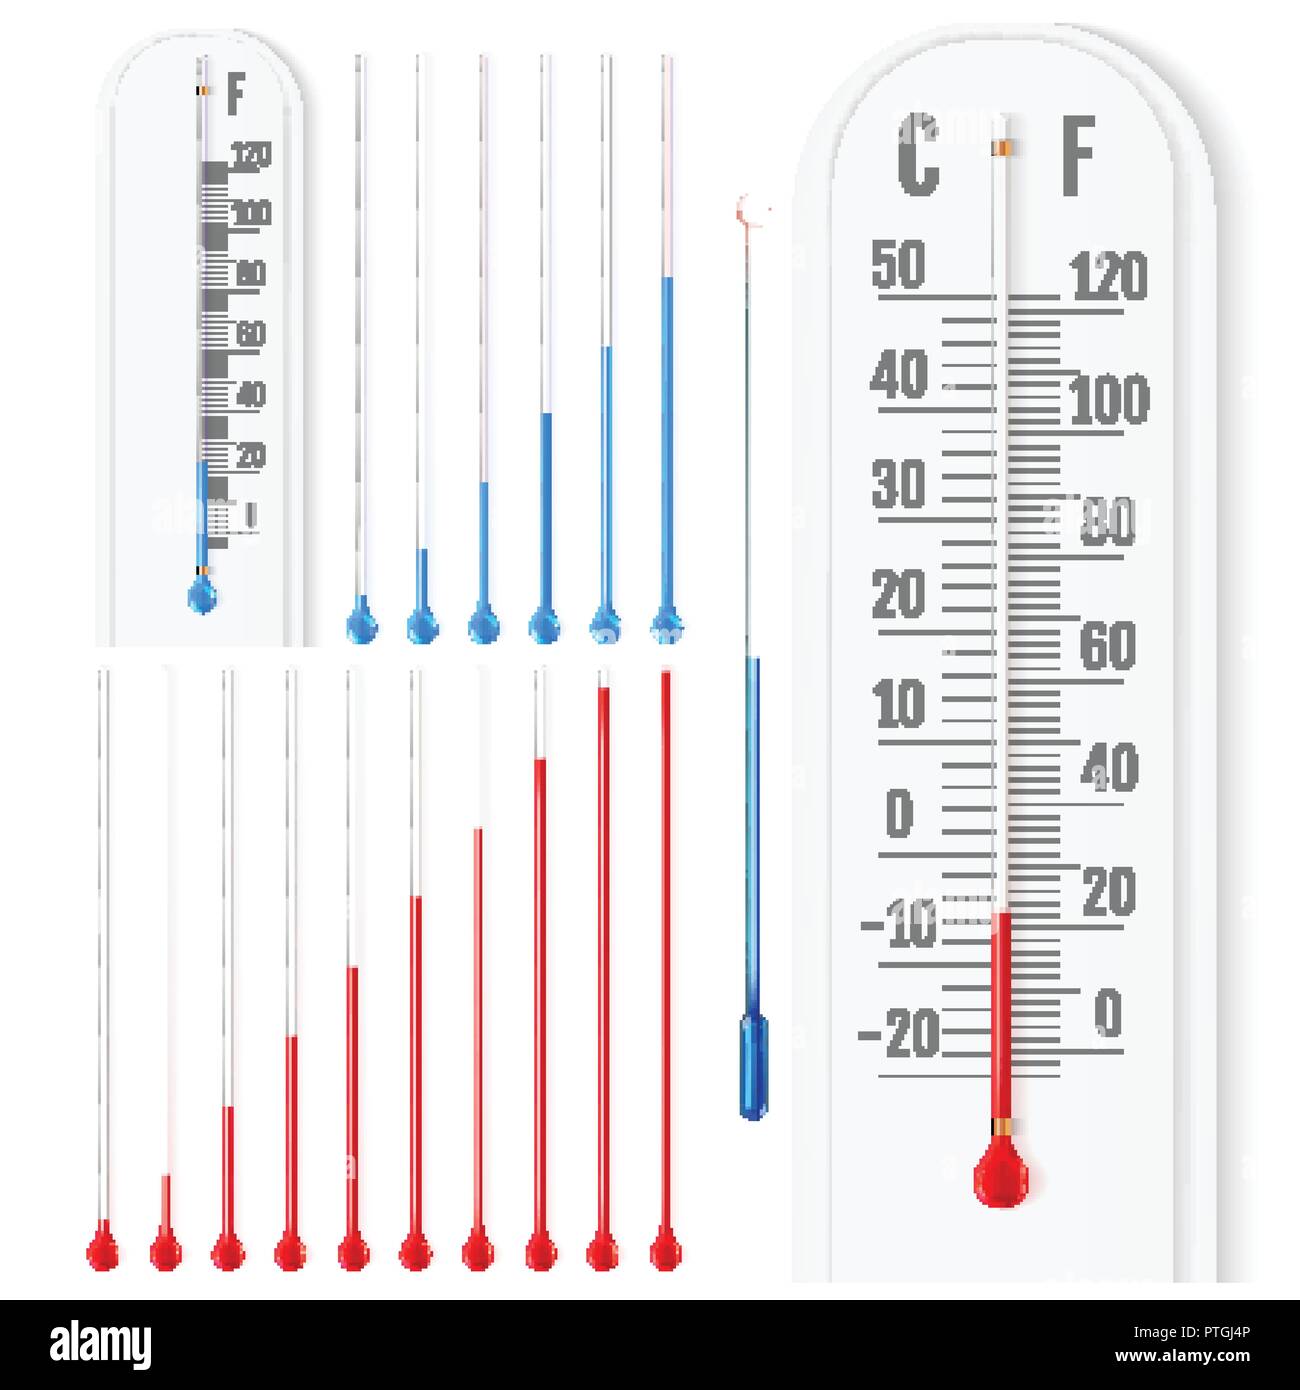 Indoor thermometers in Fahrenheit scale Stock Photo by ©magraphics